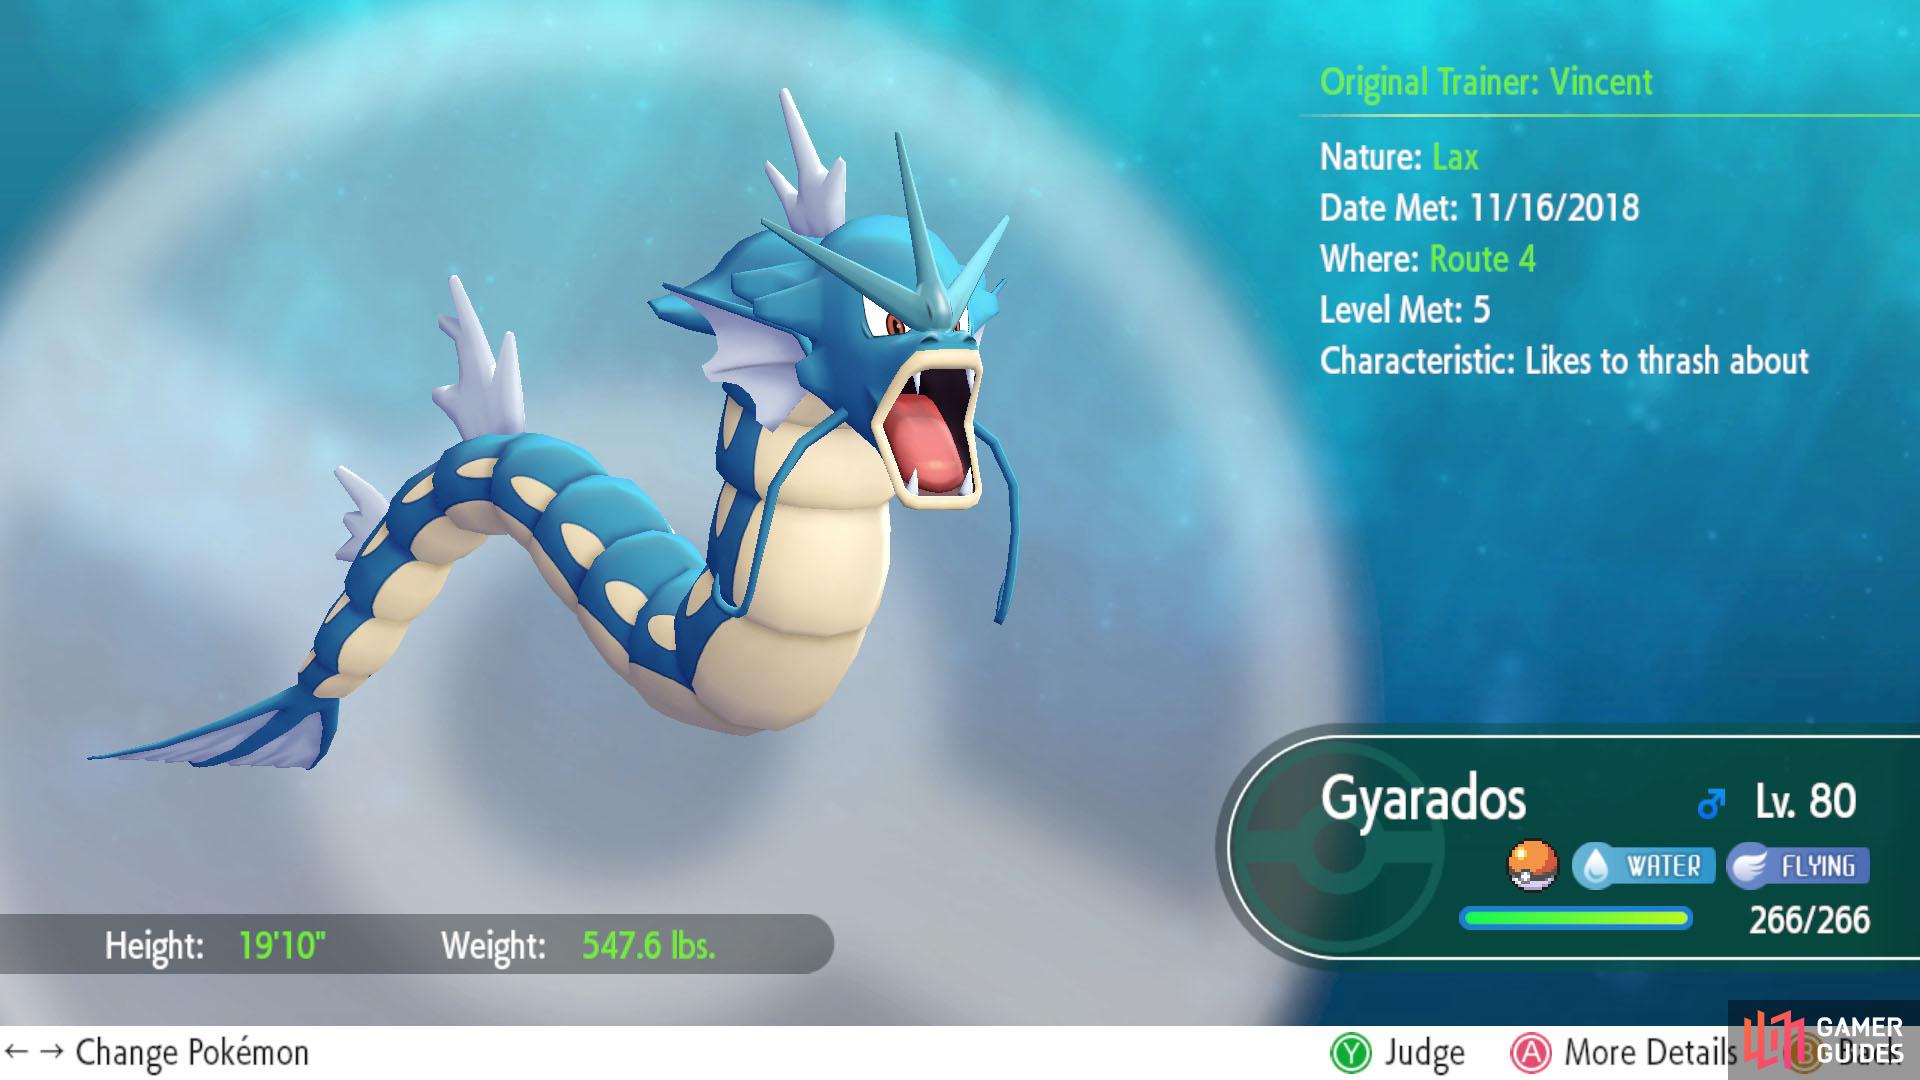 Our Gyarados is Lax. Although you wouldn't know from all the destruction it's caused.